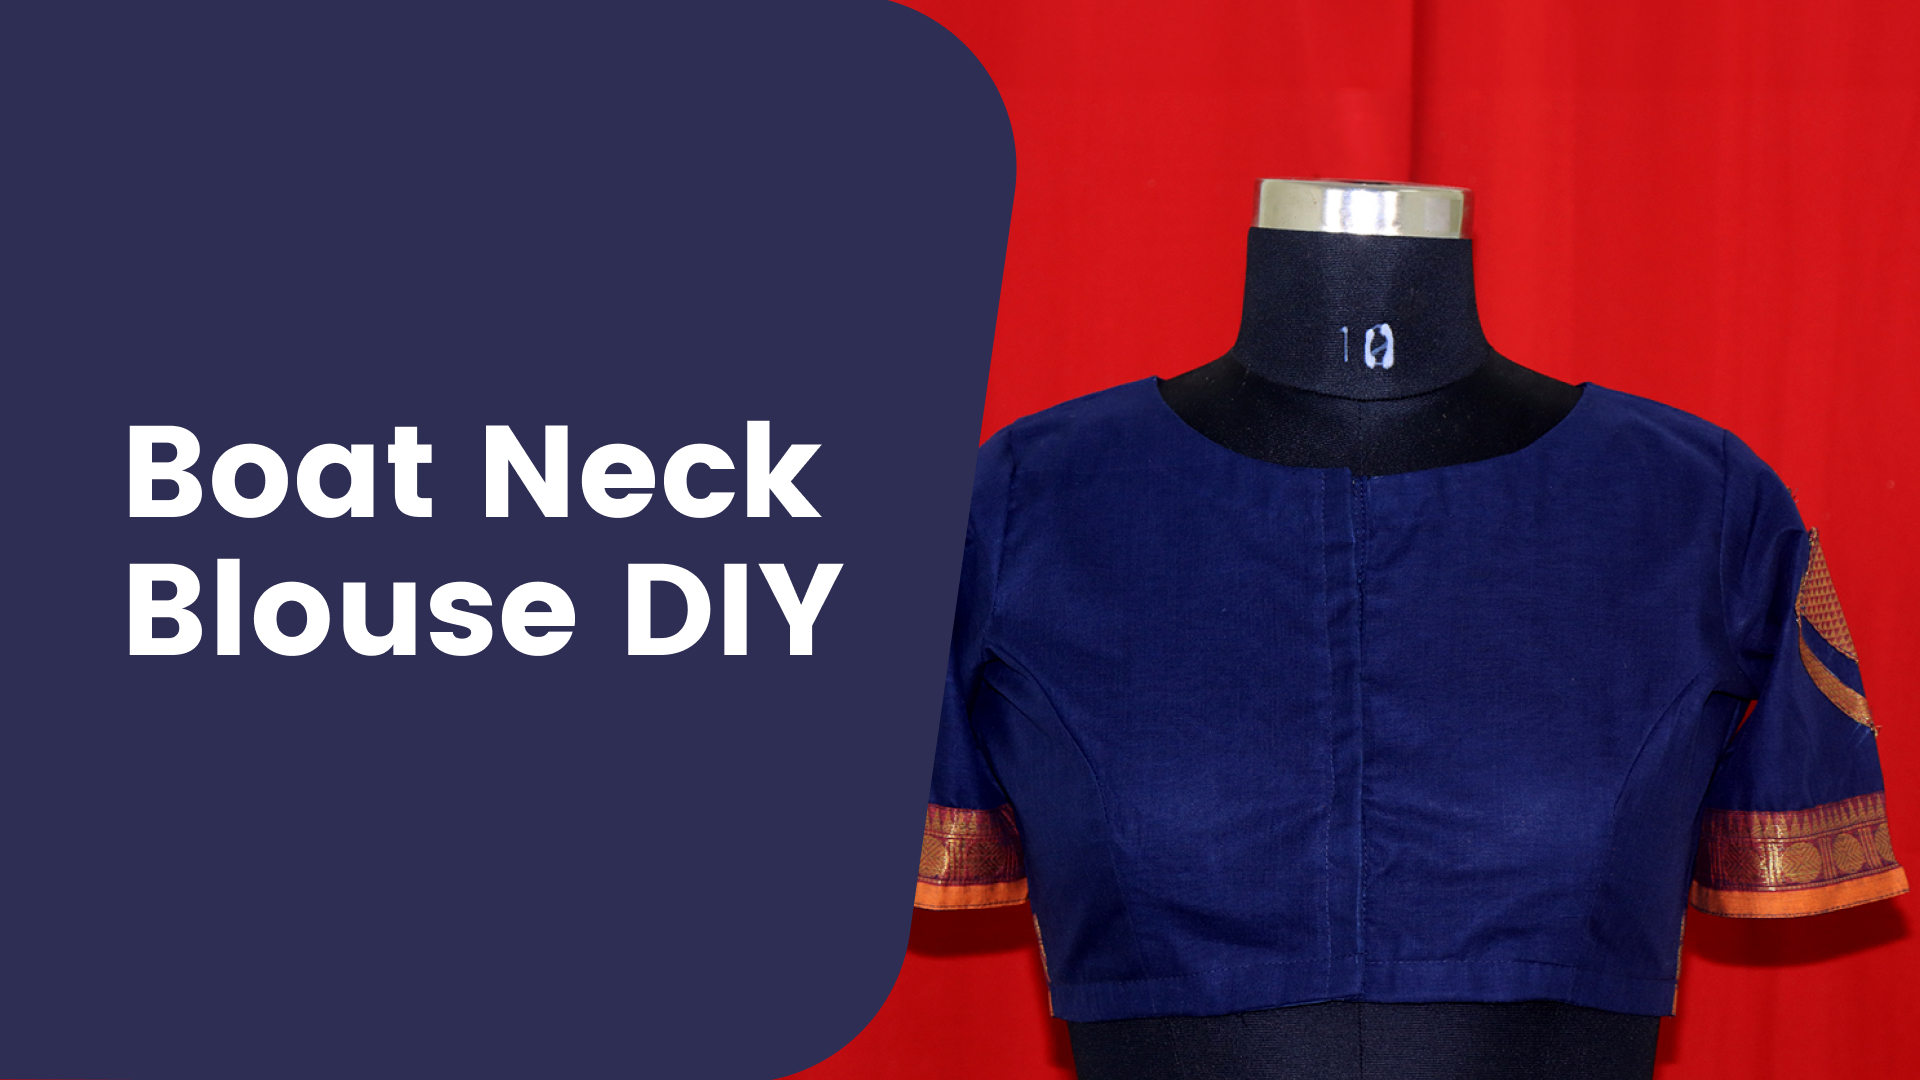 Course Trailer: How to Stitch a Boat Neck Blouse?. Watch to know more.